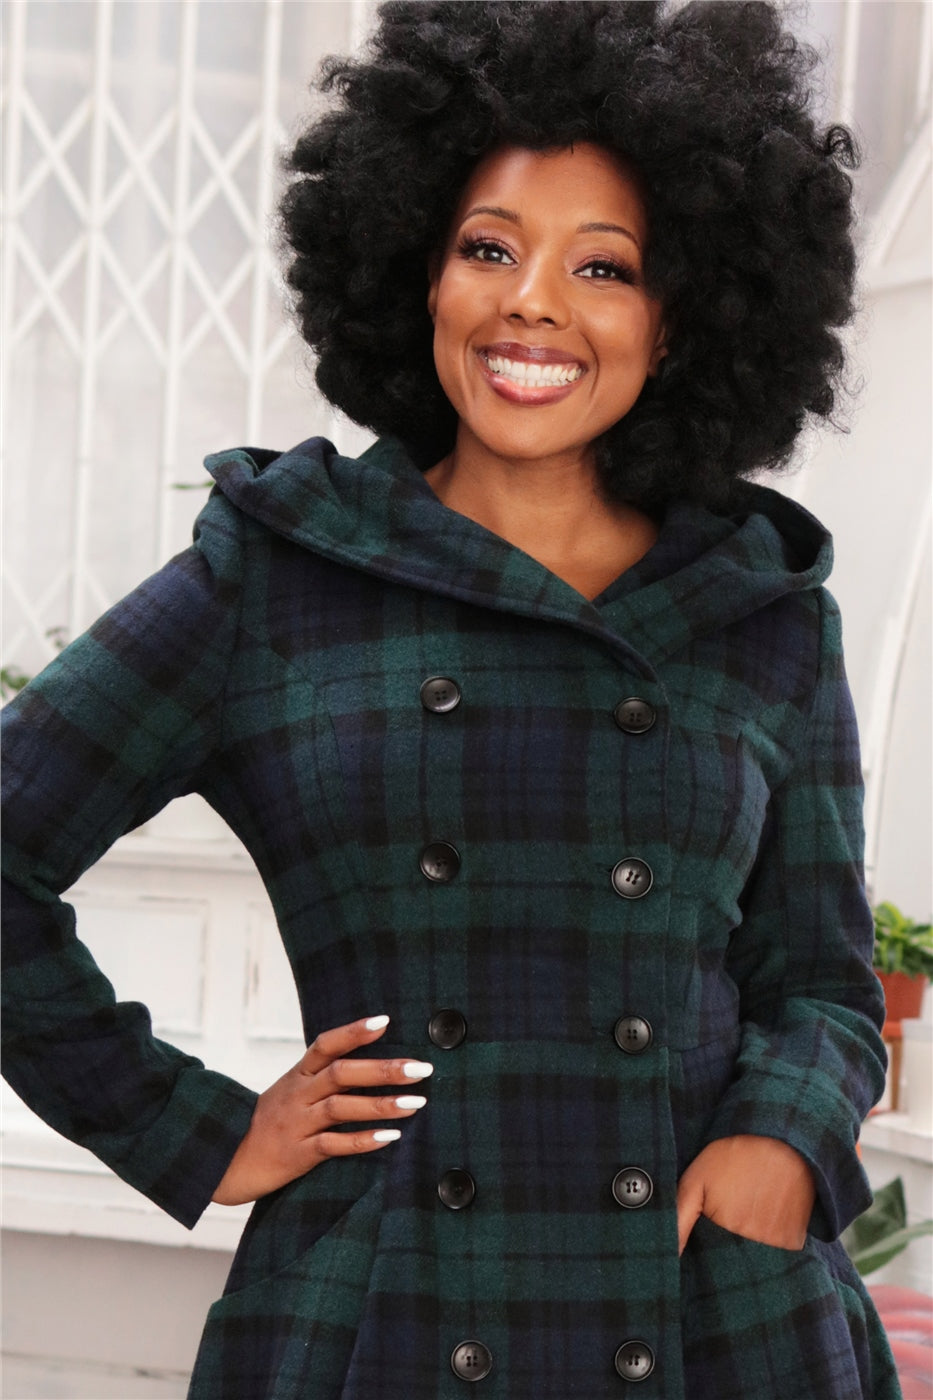 Happy, smiling woman with one hand on her hip wearing natural makeup and a warm winter tartan coat